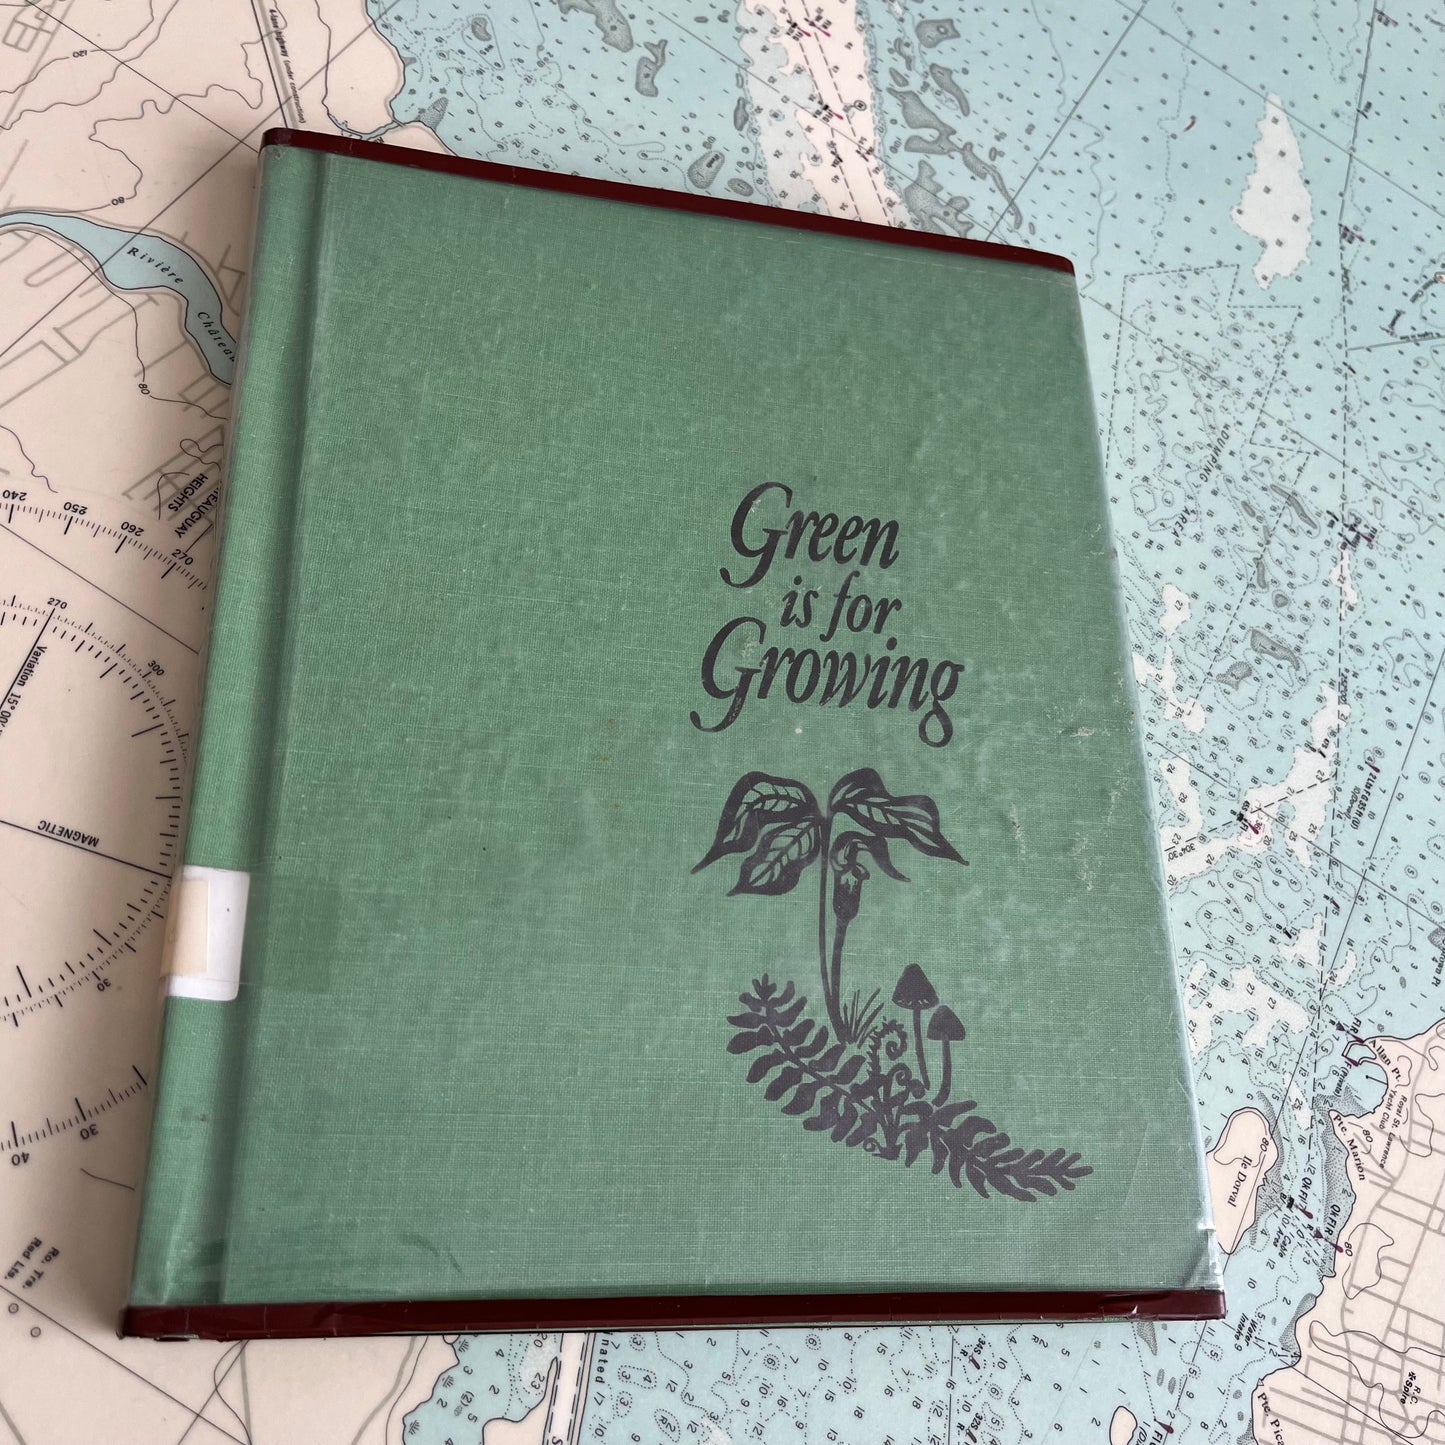 Vintage 1968 Green is for Growing Hardcover Book